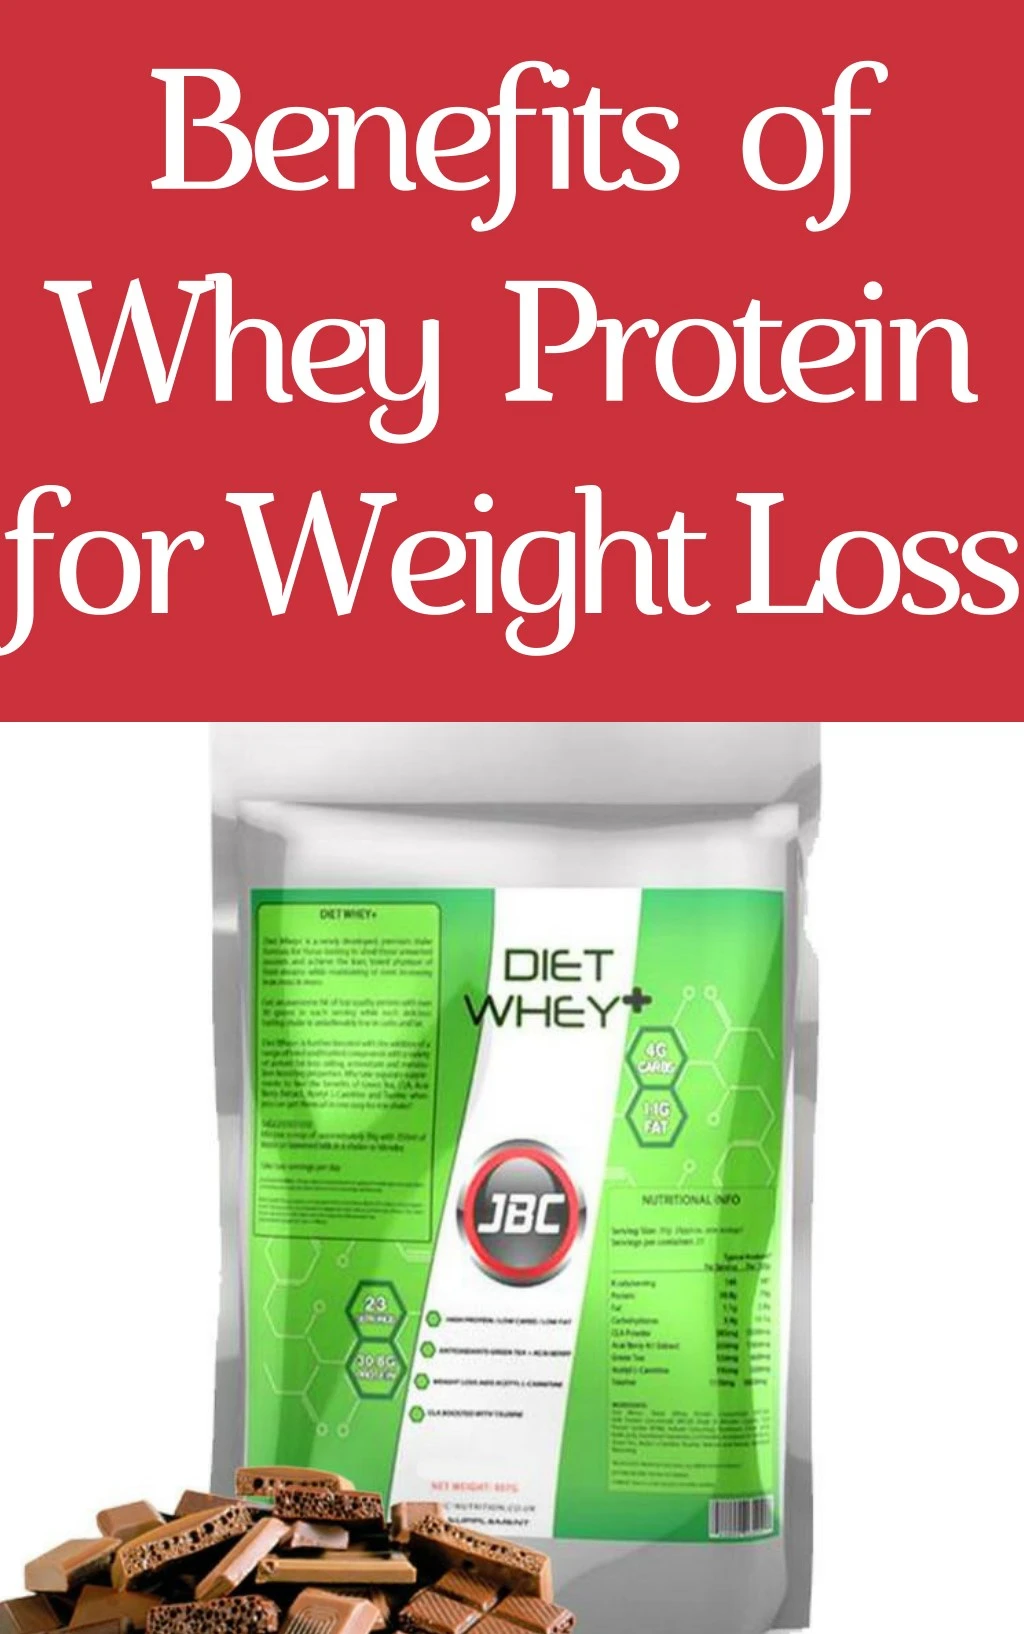 b enefits of whey protein for weight loss